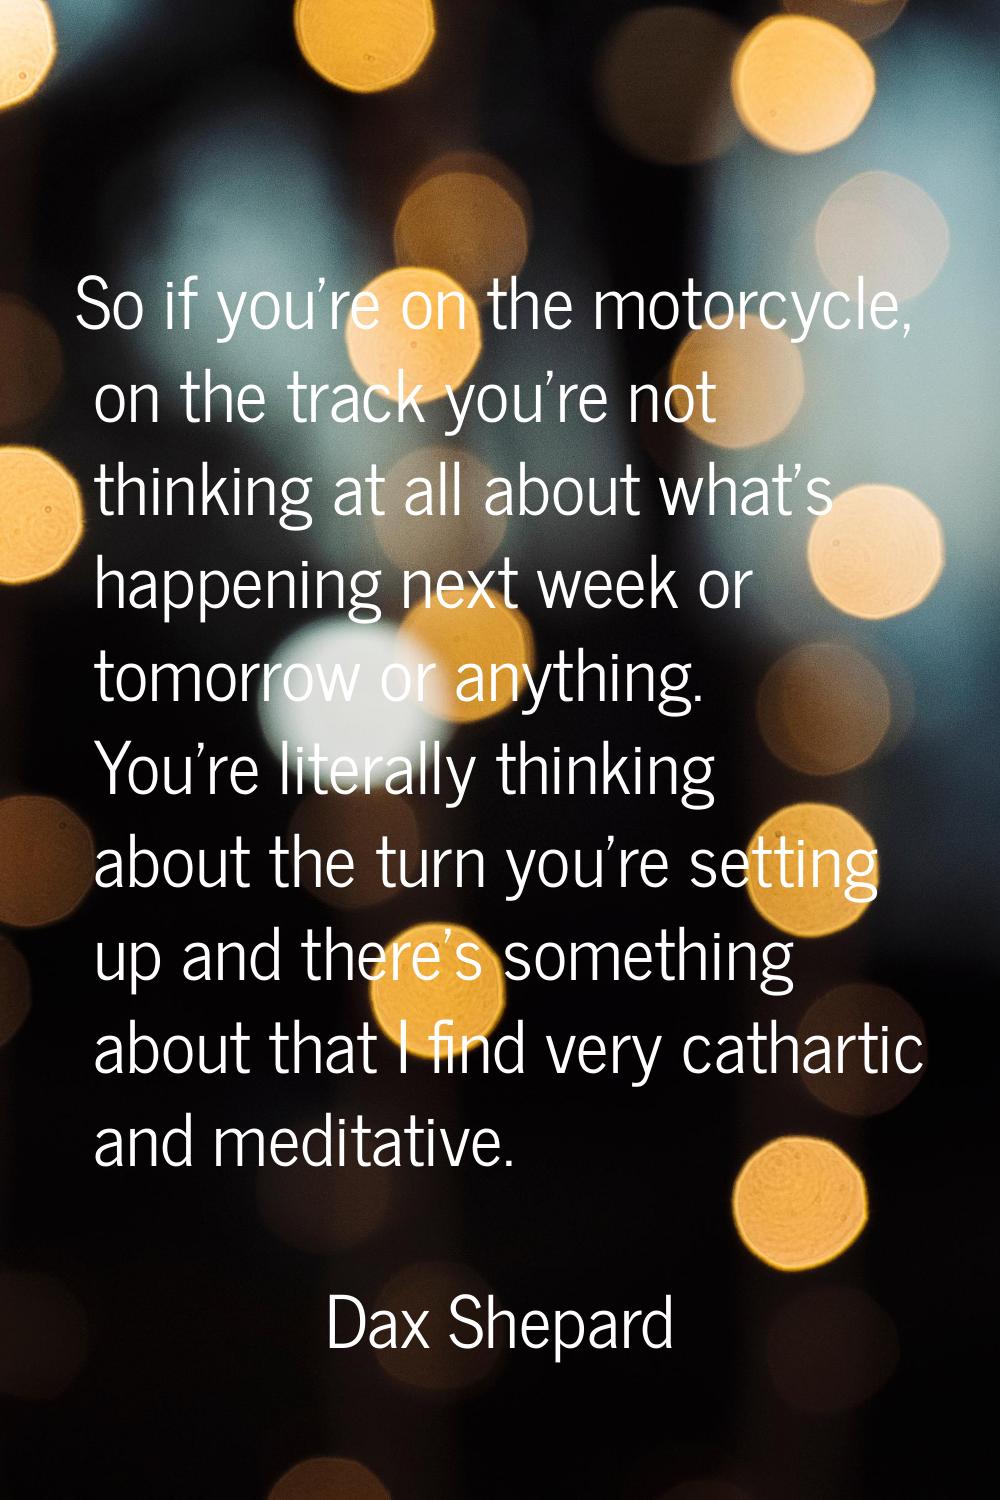 So if you're on the motorcycle, on the track you're not thinking at all about what's happening next